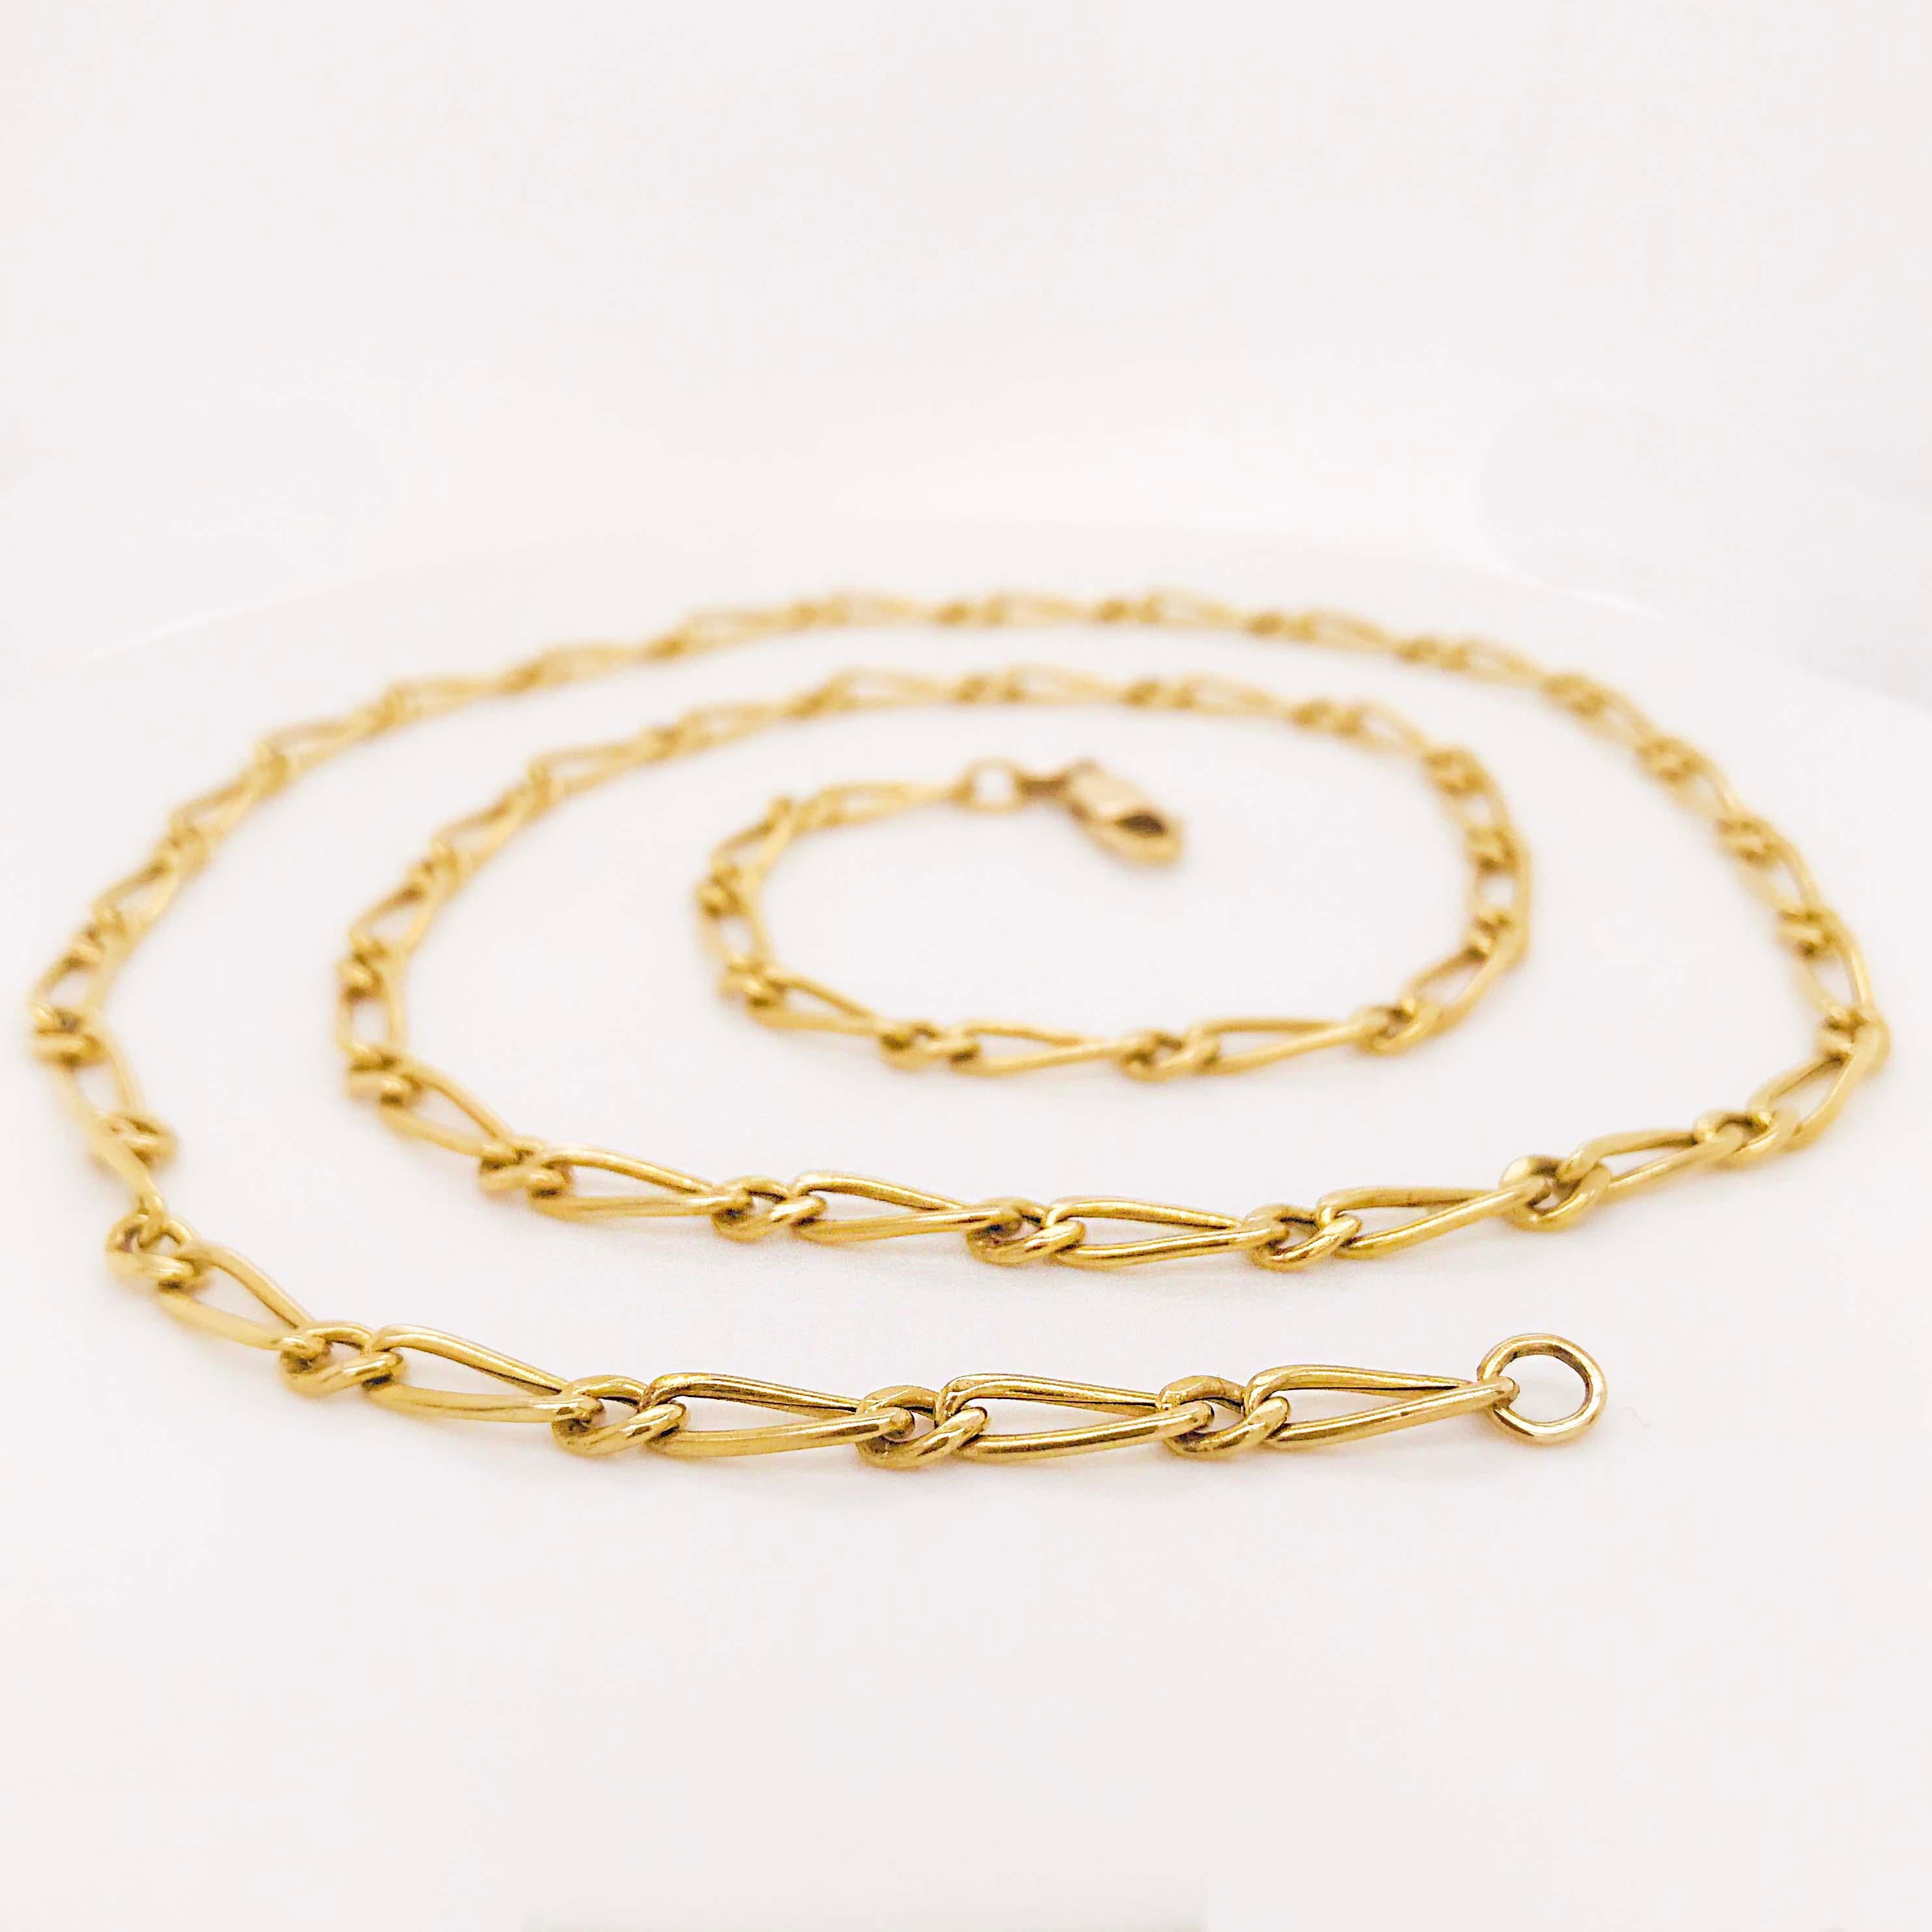 Paperclip Link Figaro Necklace with Large Clasp, 14 Karat Gold, circa 1995 1